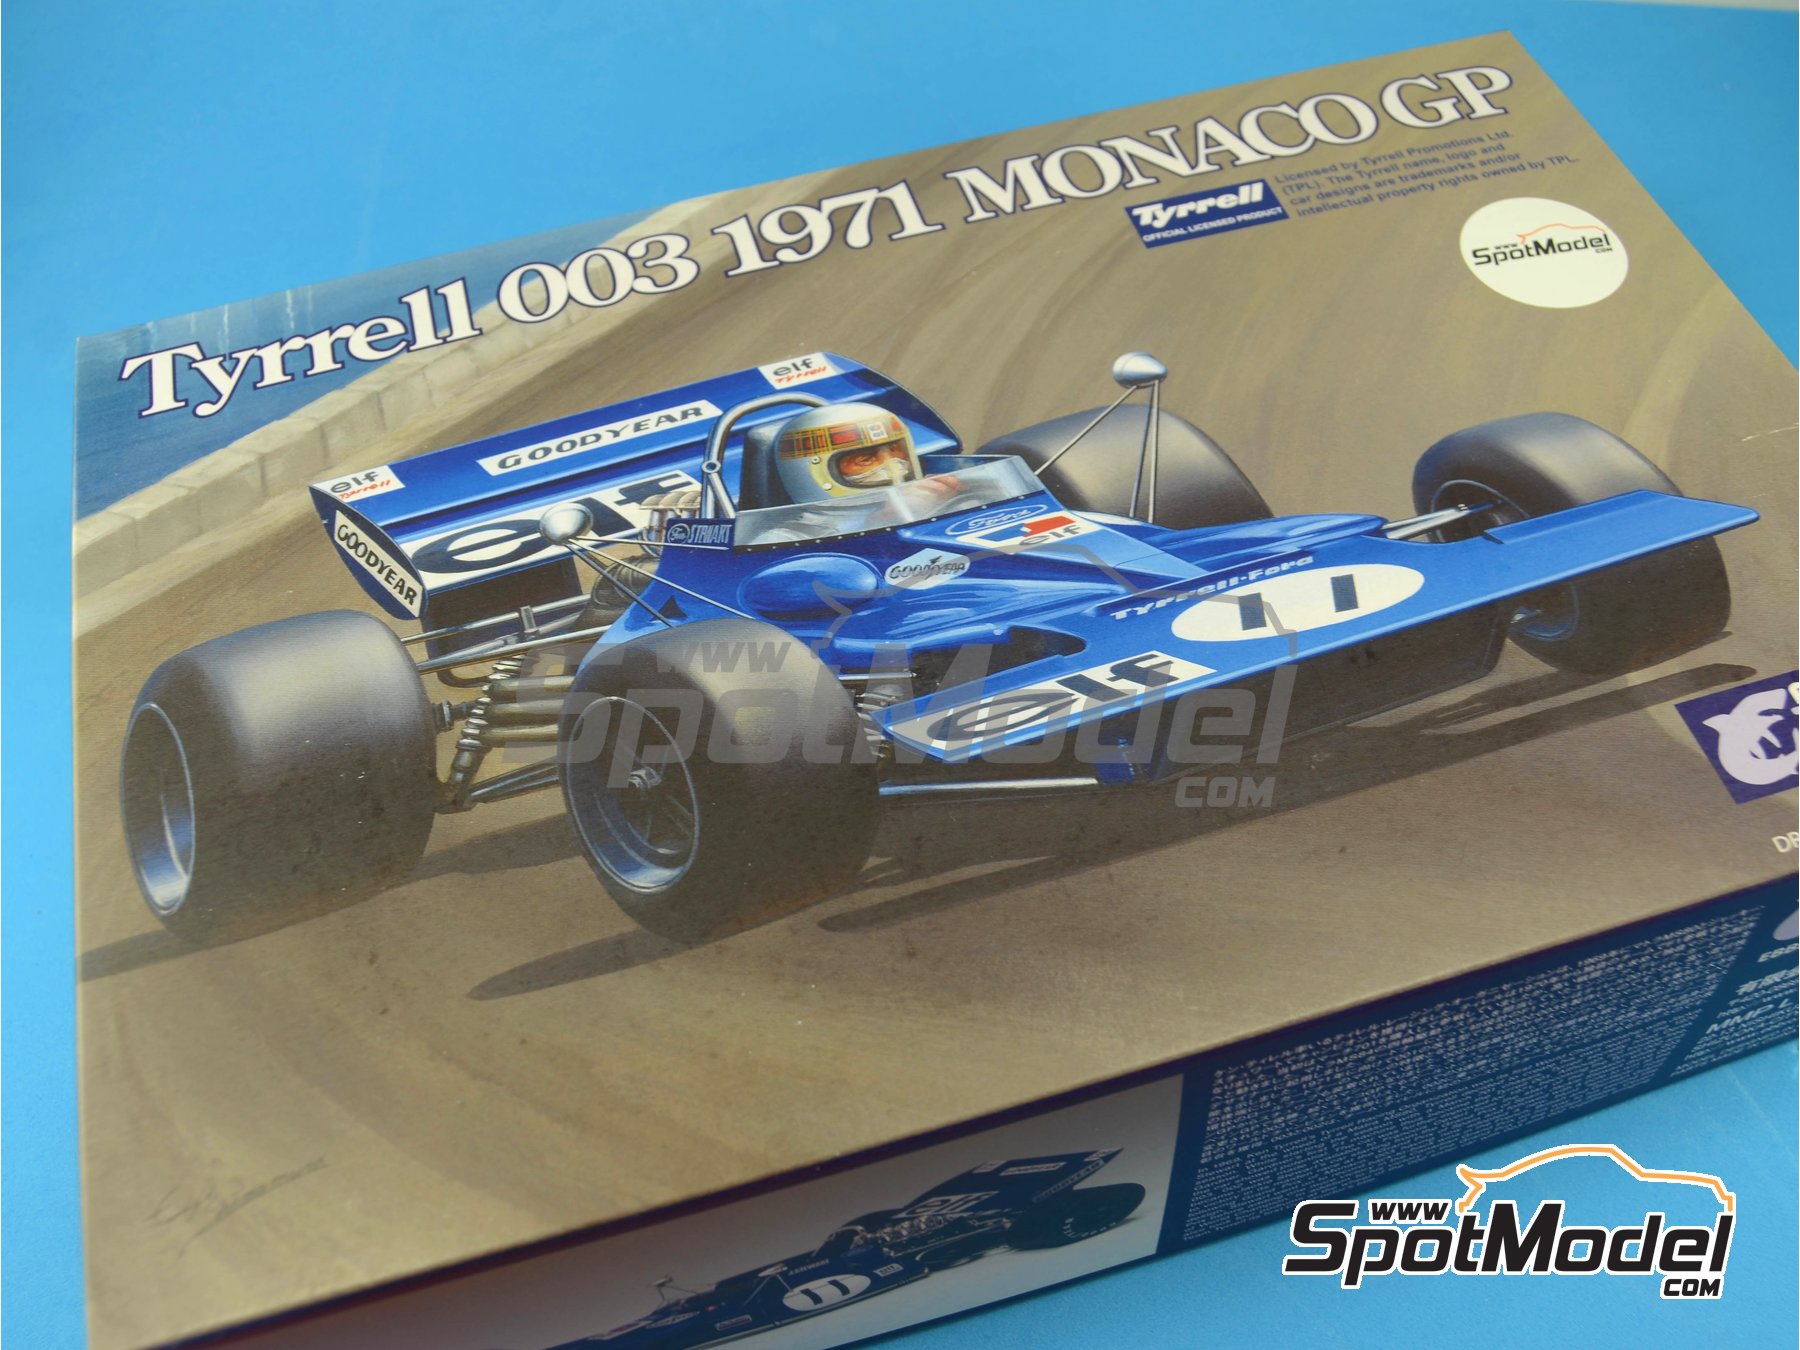 EBBRO 1/20 Tyrrell 003 Monaco GP 1971 Plastic Model 20007 With Tracking Number for sale online 